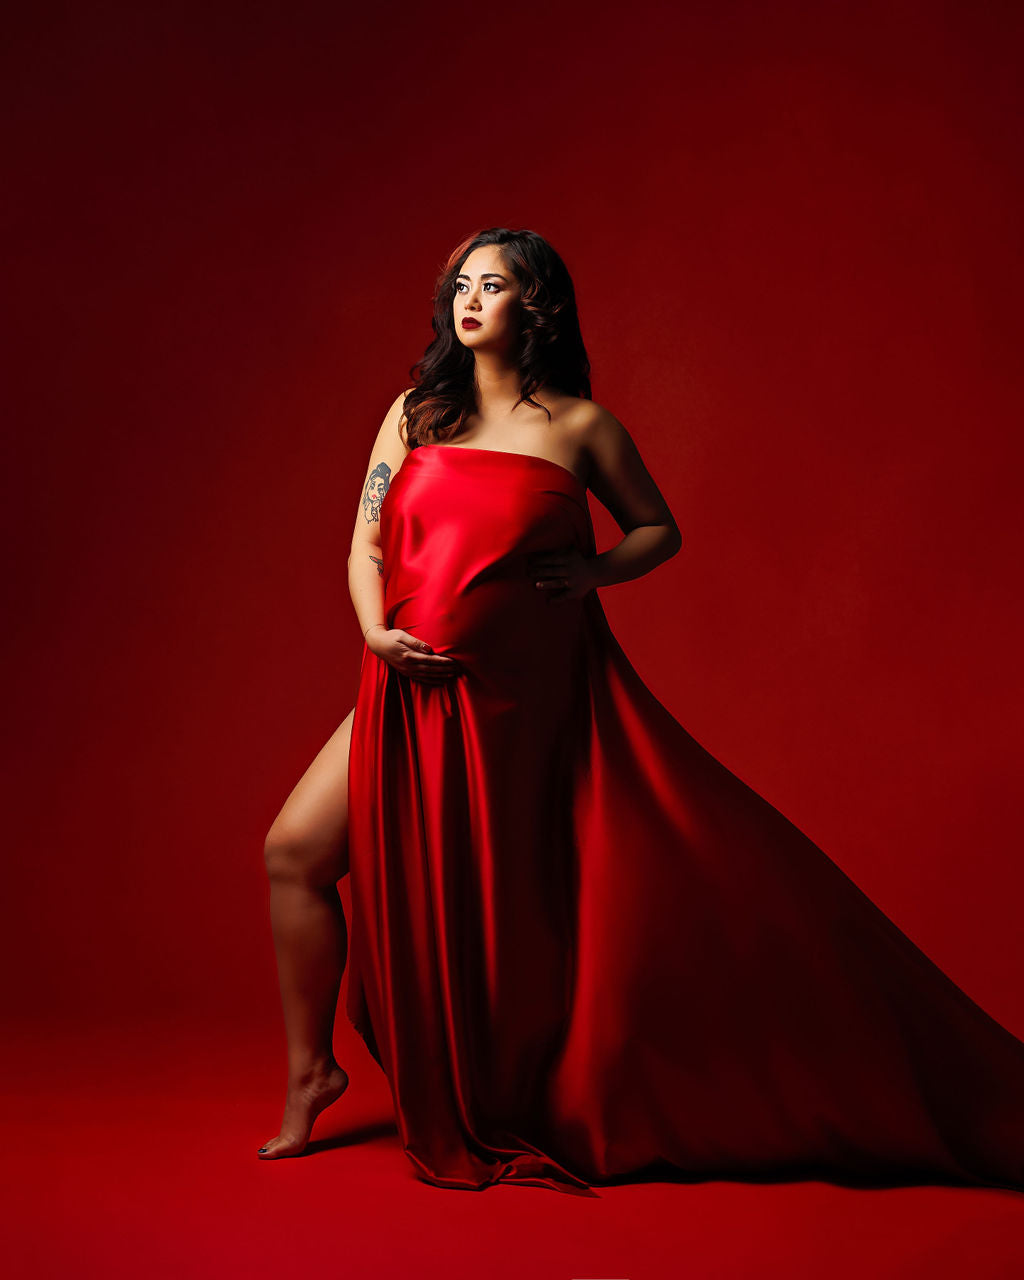 Red Satin Tossing Fabric - maternity photoshoot dress